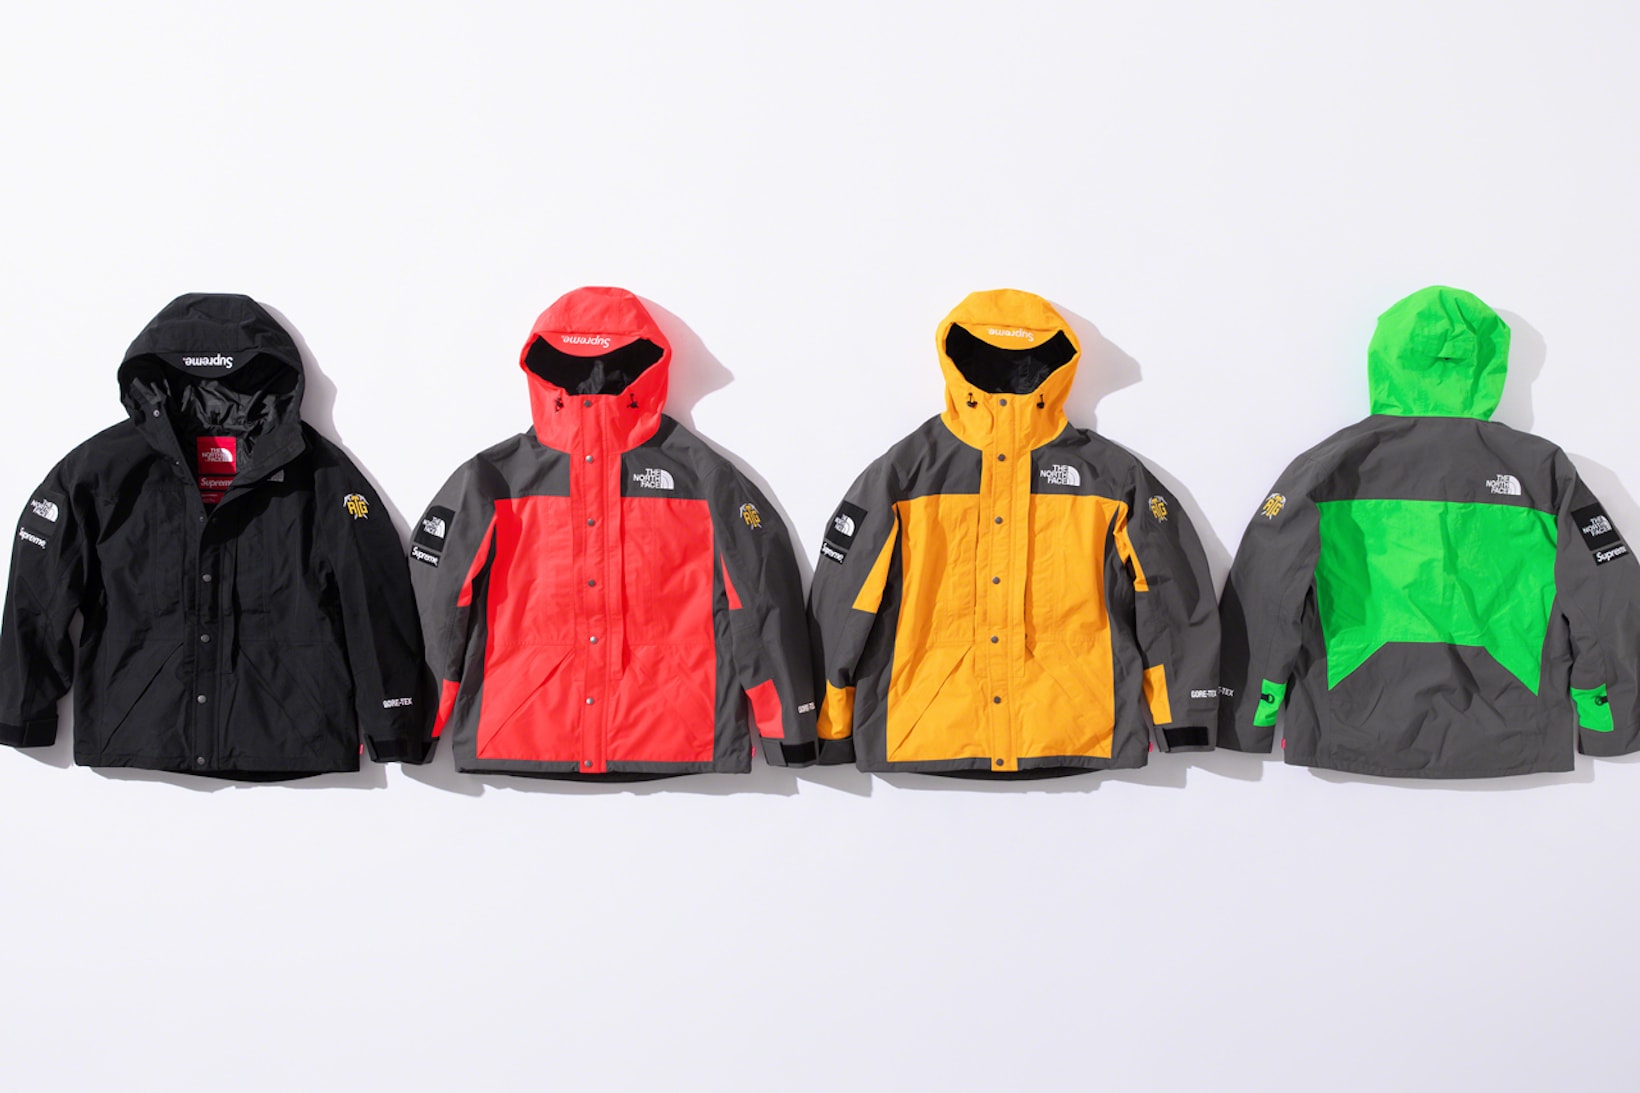 supreme the north face collaboration spring gore tex outerwear rtg jackets bags beanies black red neon green 